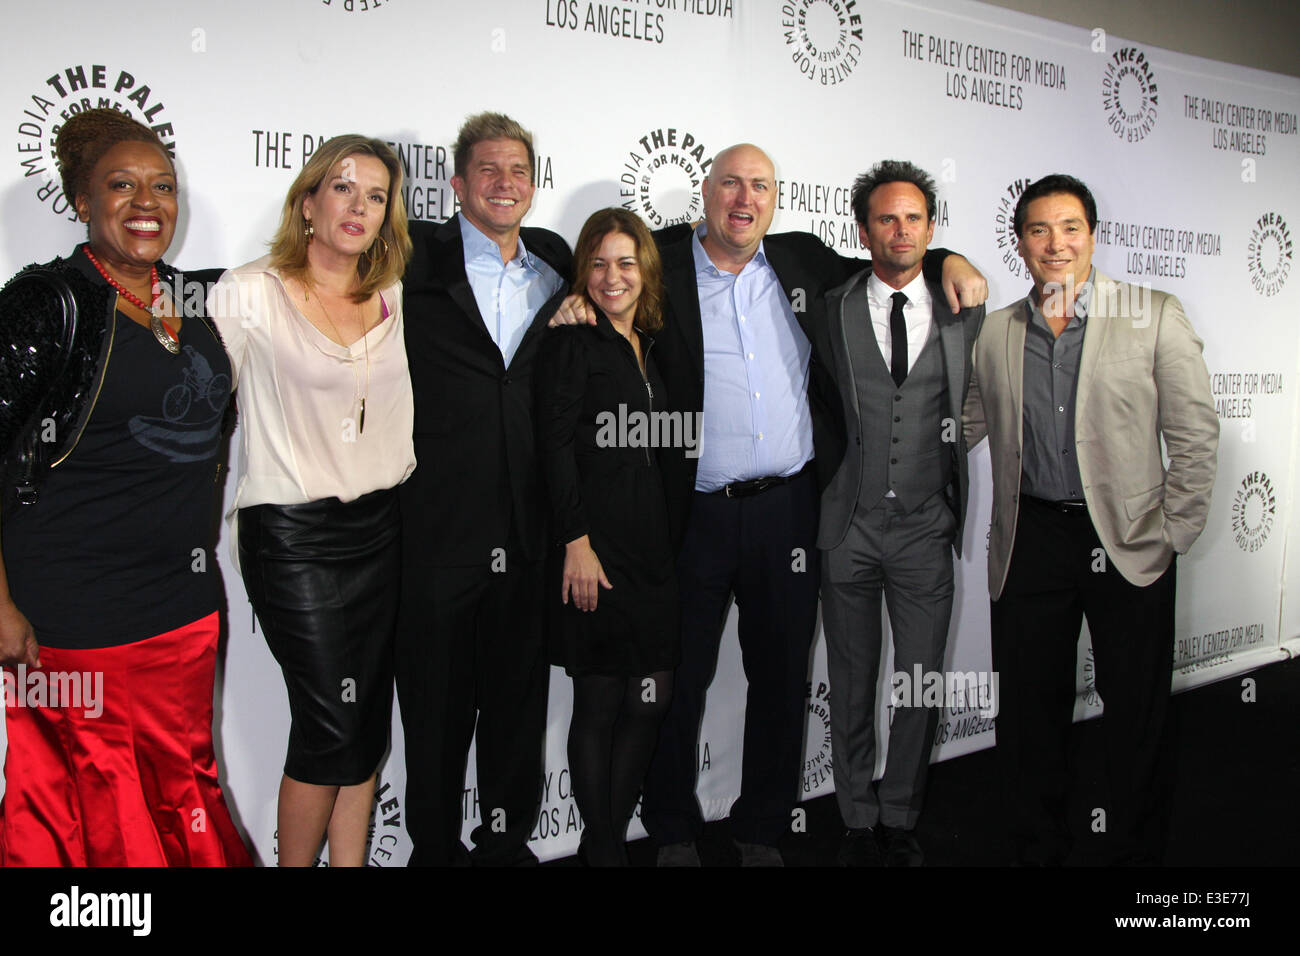 2013 Paley Center for Media Benefit Gala honoring FX Network on the 21st Century Fox Lot  Featuring: Shield Cast,CCH Pounder,Catherine Dent,Kenny Johnson,Cathy Ryan,Shawn Ryan,Walton Goggins,Benito Martinez Where: Century City, CA, United States When: 17 Stock Photo